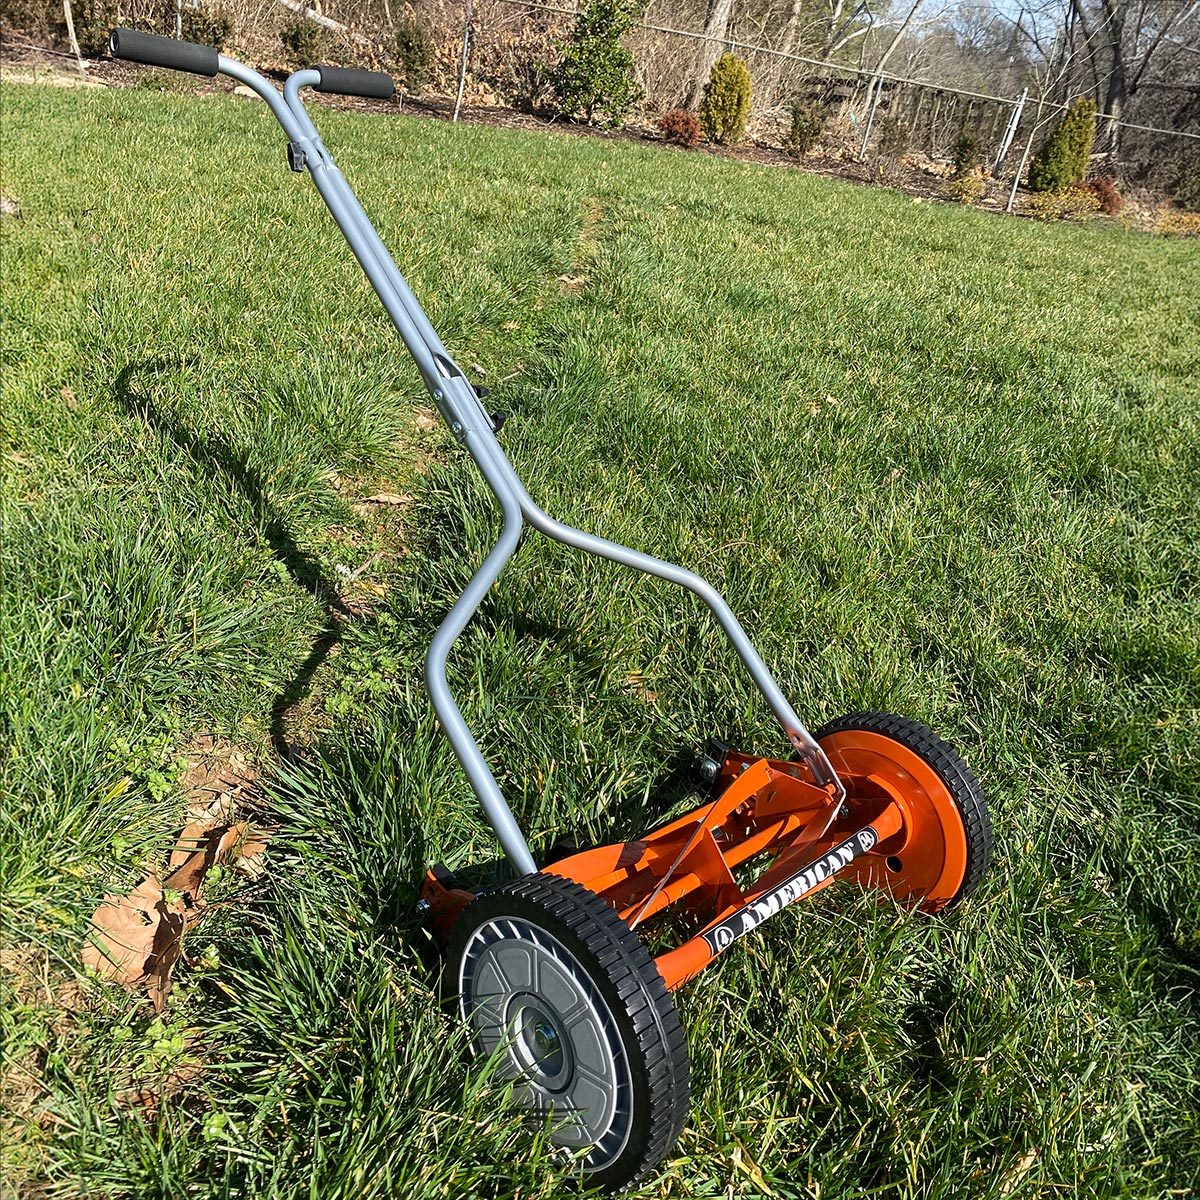 <h3>American Lawn Mower Company 14-inch Reel Mower</h3> <p>For those of us <a href="https://www.familyhandyman.com/list/best-lawn-mowers-for-small-yards/" rel="noopener noreferrer">with very small lawns</a>, there's no point and no space for getting a big gas-powered or battery-powered mower. A simple, sleek, small reel mower that requires only a few minutes and a few calories burnt will do the job just fine.</p> <p>Most folks are skeptical of reel mowers at first, but when you buy a reel mower like the <a href="https://www.amazon.com/American-Lawn-Mower-Company-1204-14/dp/B00004RA3F/" rel="noopener">American Lawn Mower Company's 14-inch reel mower</a>, you begin to appreciate the quiet and straightforward cutting ability of reel mowers. Compared to other reel mowers, this American Lawn Mower Company mower will take up slightly less space and comes in at an ultra-low price point.</p> <p><strong>Pros</strong></p> <ul> <li>Very inexpensive</li> <li>Small and easy to store</li> <li>Quiet</li> </ul> <p><strong>Cons</strong></p> <ul> <li>Fewer blades</li> <li>Requires more frequent mowing</li> </ul> <p class="listicle-page__cta-button-shop"><a class="shop-btn" href="https://www.amazon.com/American-Lawn-Mower-Company-1204-14/dp/B00004RA3F/">Shop on Amazon</a></p> <p class="listicle-page__cta-button-shop"><a class="shop-btn" href="https://www.walmart.com/ip/American-Lawn-Mower-1204-14-14-Inch-4-Blade-Push-Reel-Lawn-Mower/34118427">Shop on Walmart</a></p>